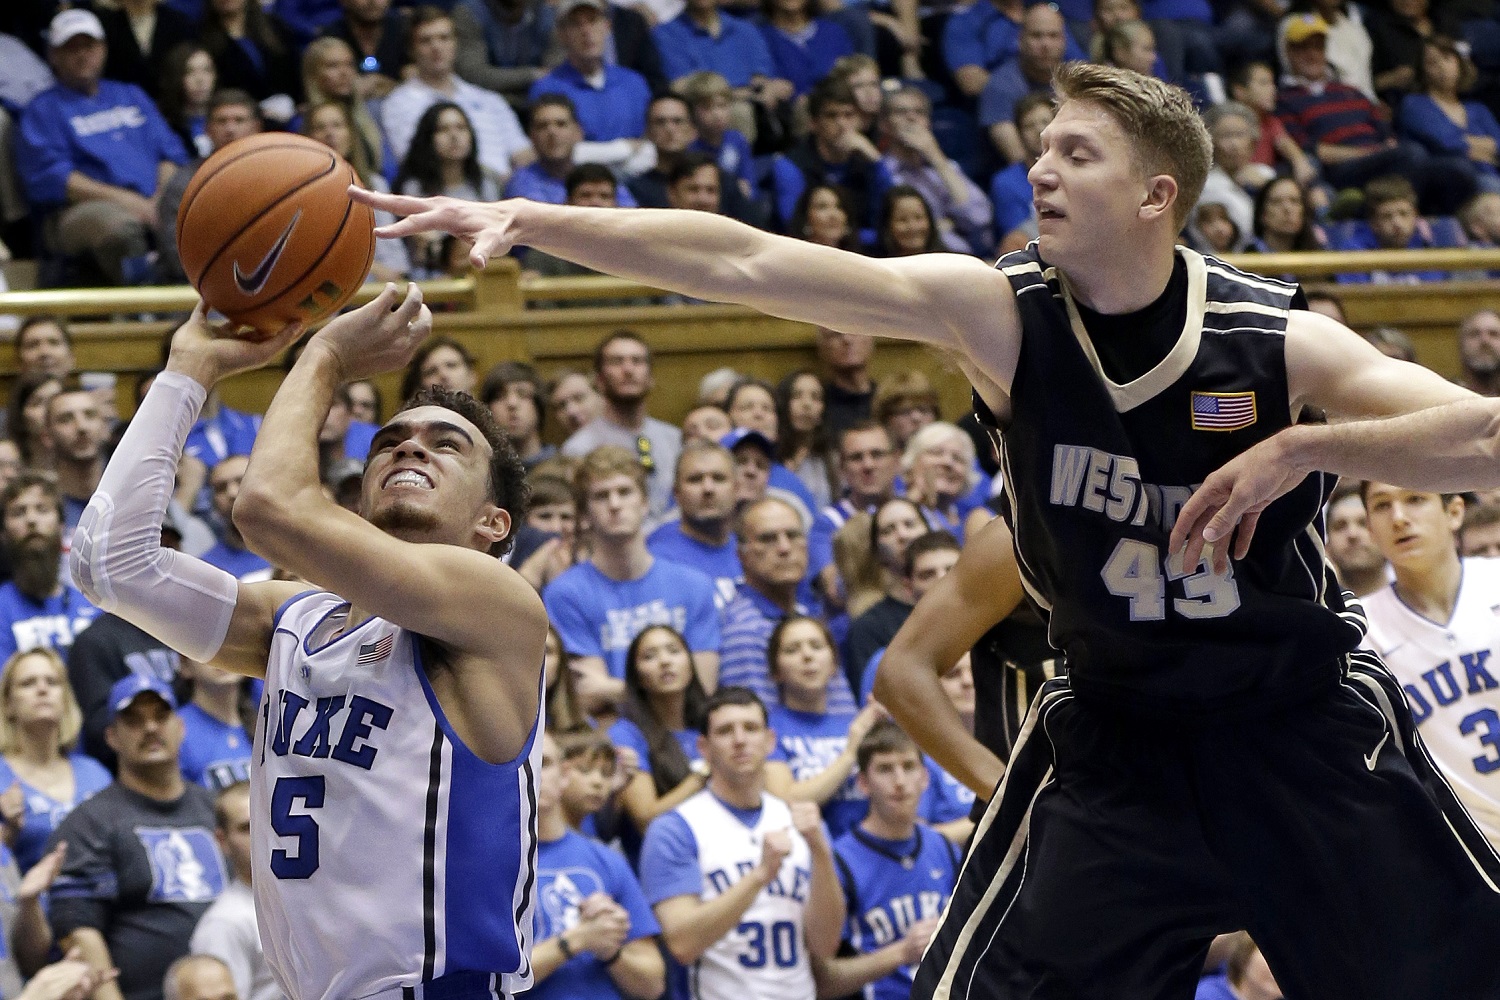 Duke's Tyus Jones (5) drives to the basket as Army's Travis Rollo (43) defends during the second half of an NCAA college basketball game in Durham, N.C., Sunday, Nov. 30, 2014. Duke won 93-73. (AP Photo/Gerry Broome)